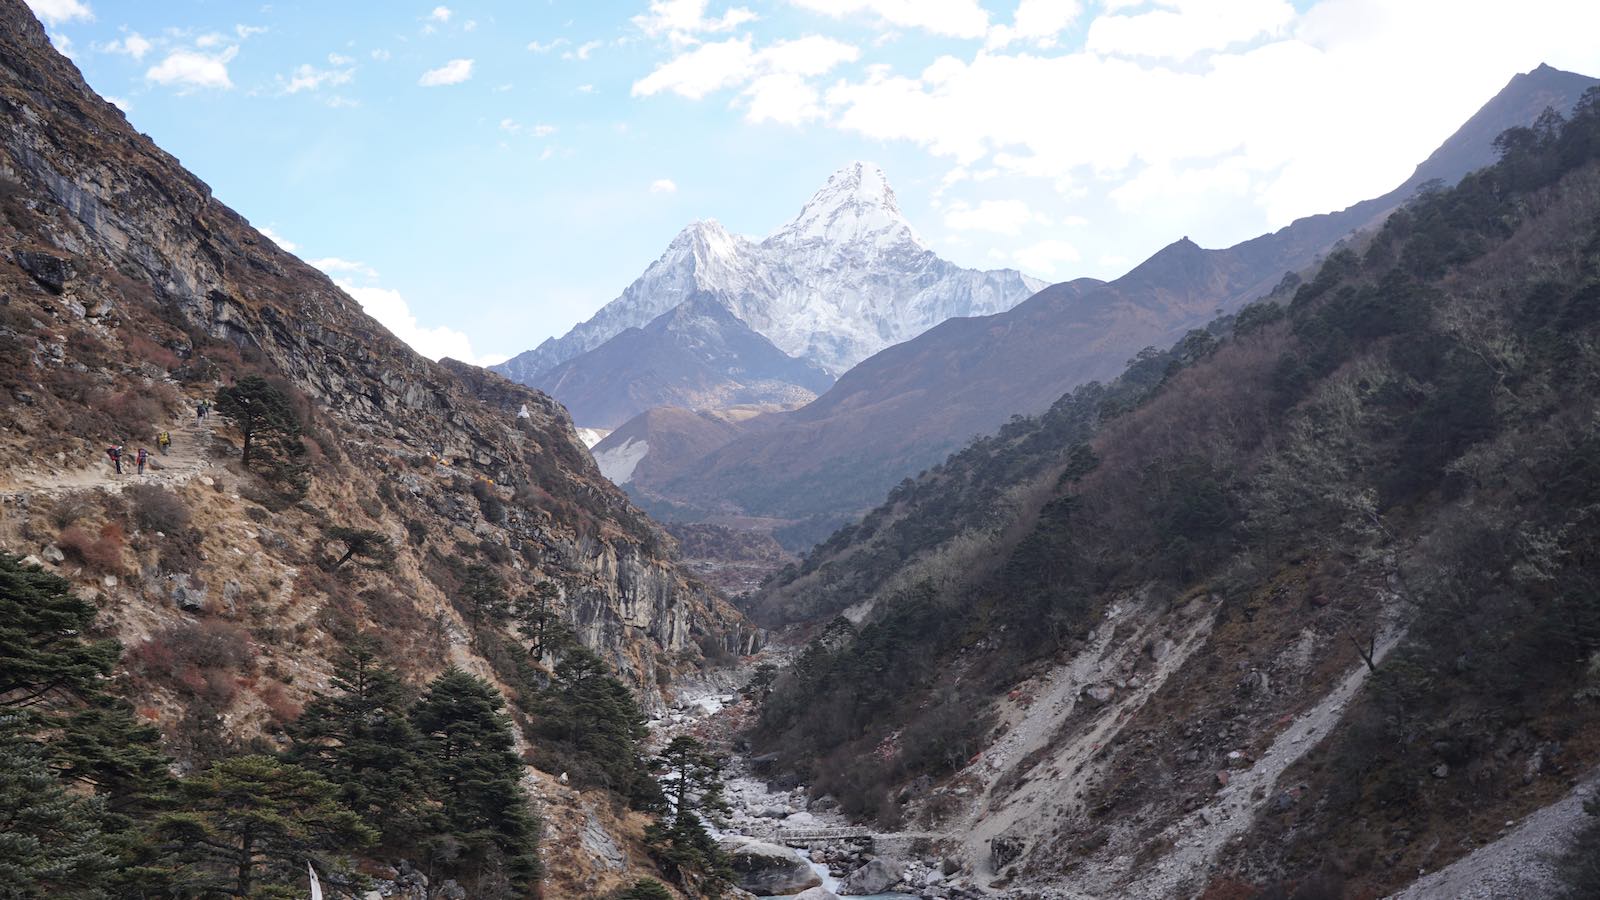 Got back down below the tree line, turned back at a river crossing for one more gorgeous look at the peak of Ama Dablam